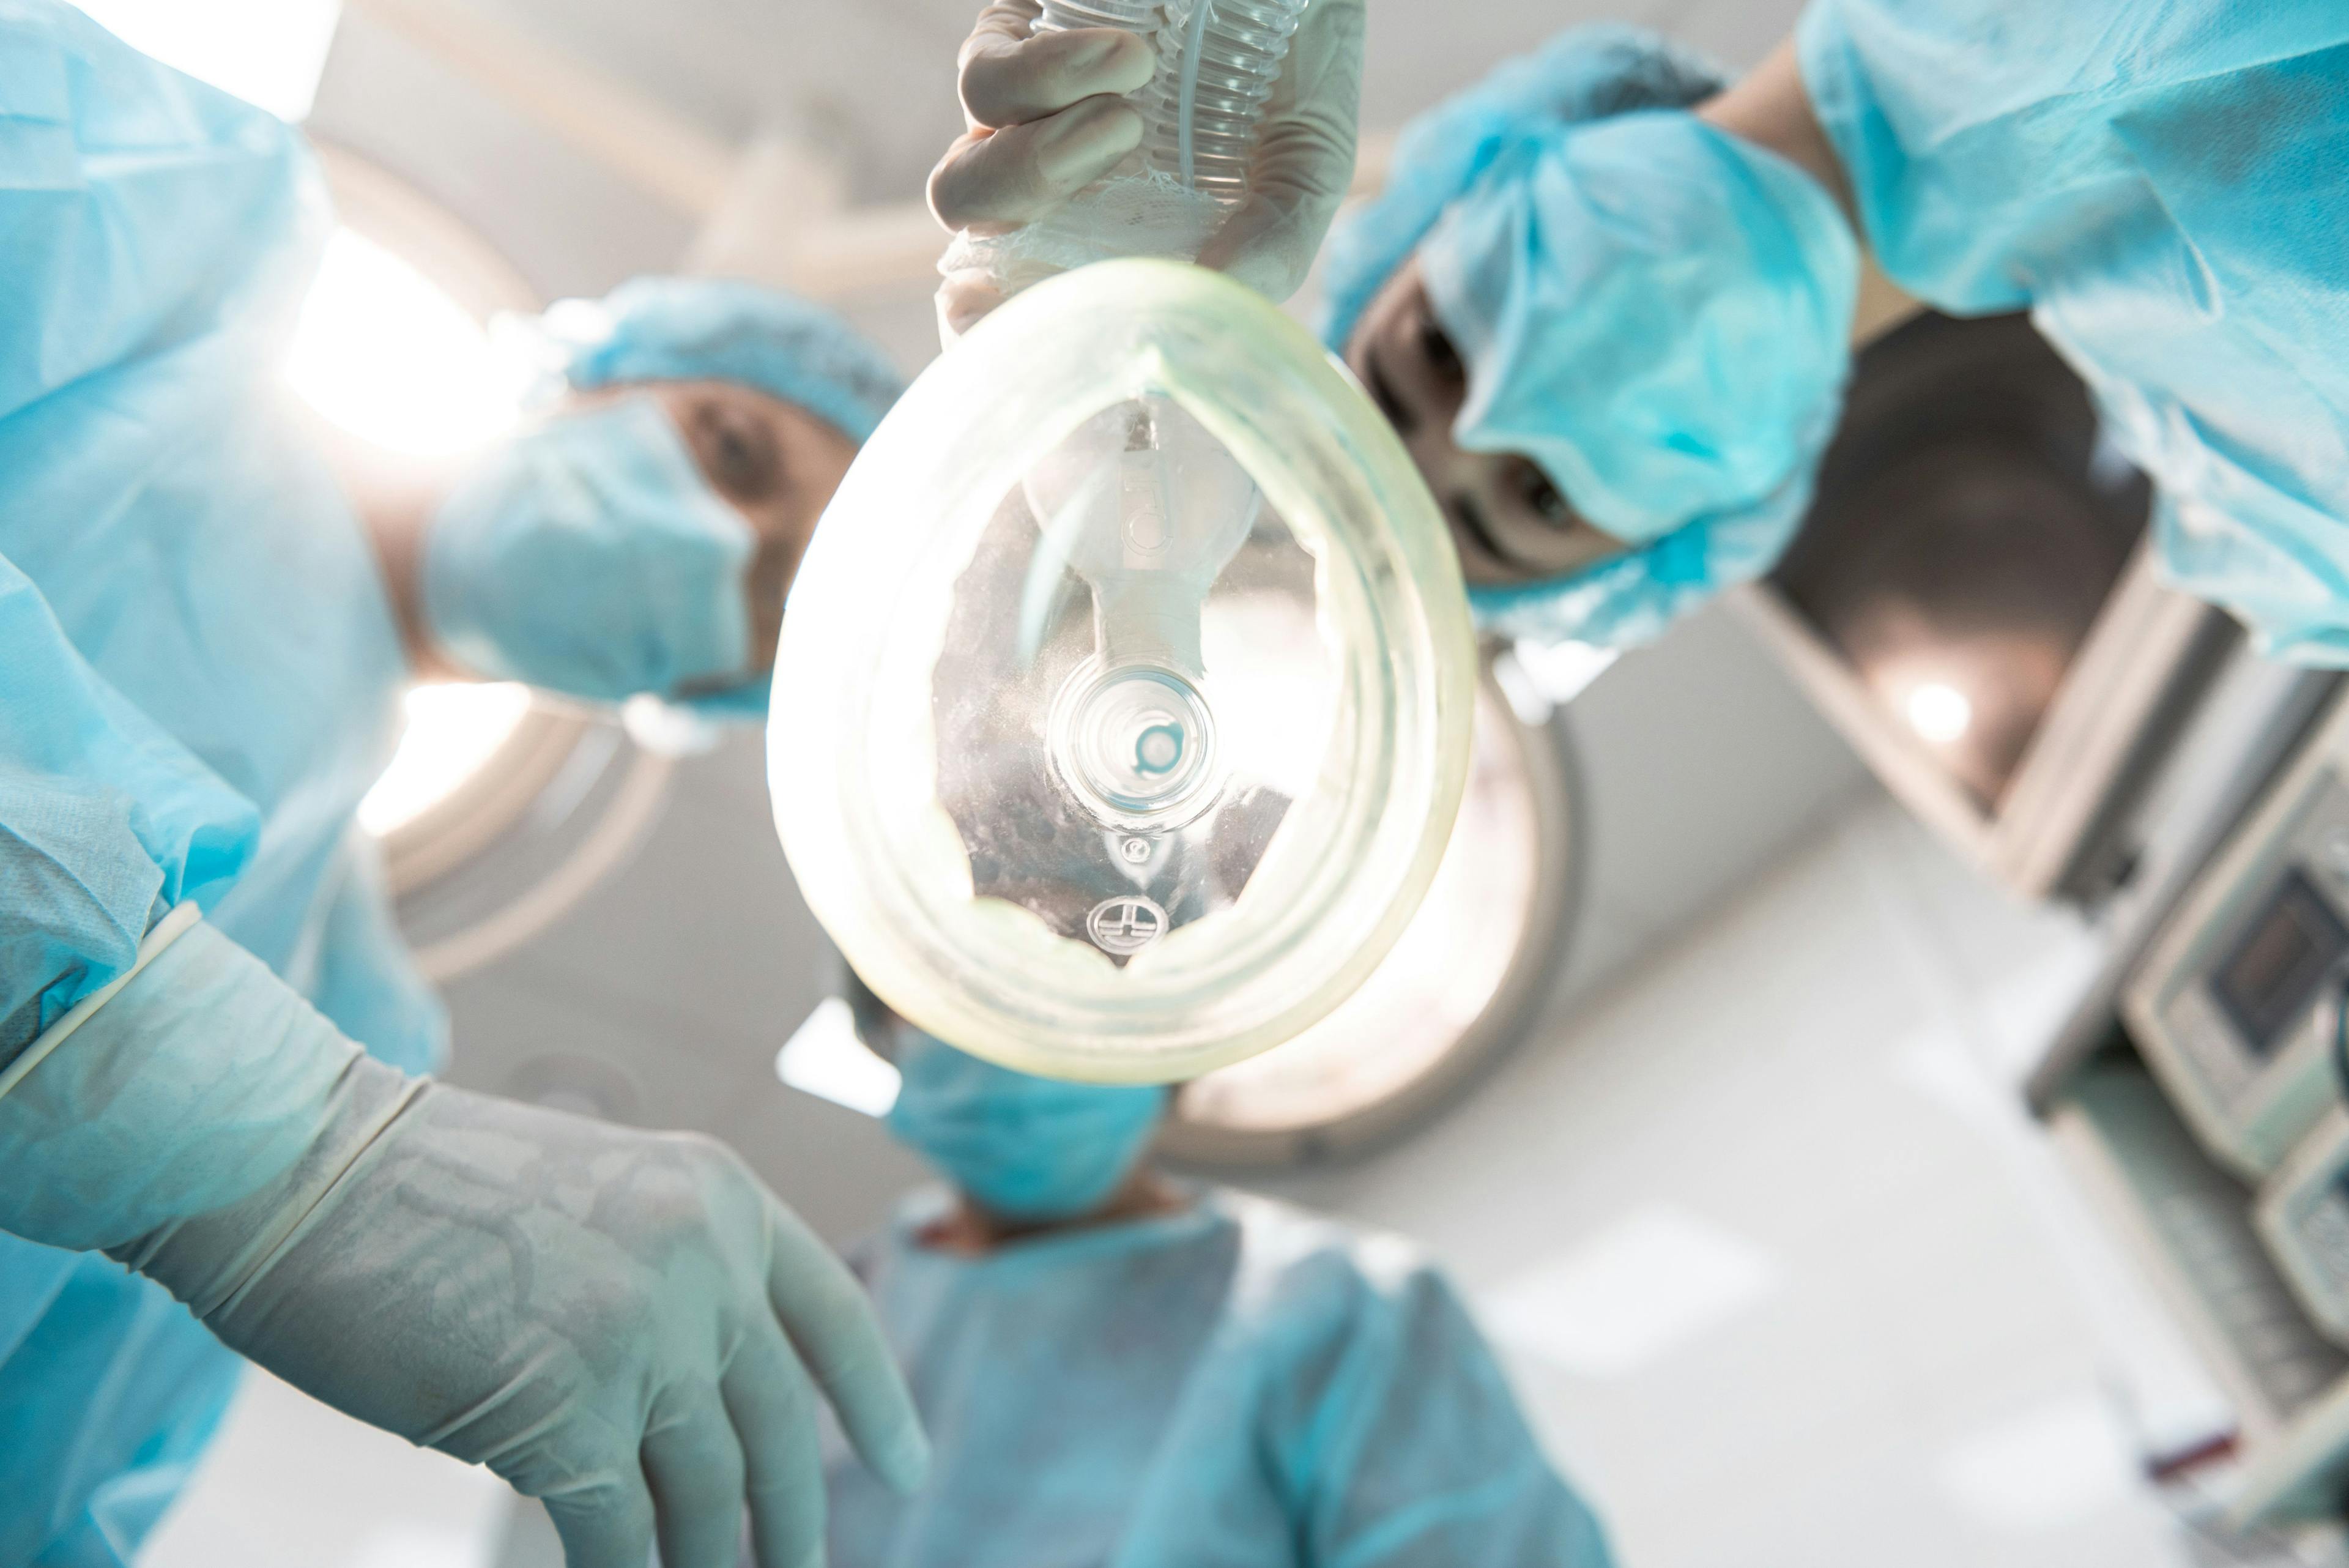 Bottom view of three professional doctors leaning over the patient and wearing medical masks while holding the anesthetic inhaler - Image credit: Yakobchuk Olena | stock.adobe.com